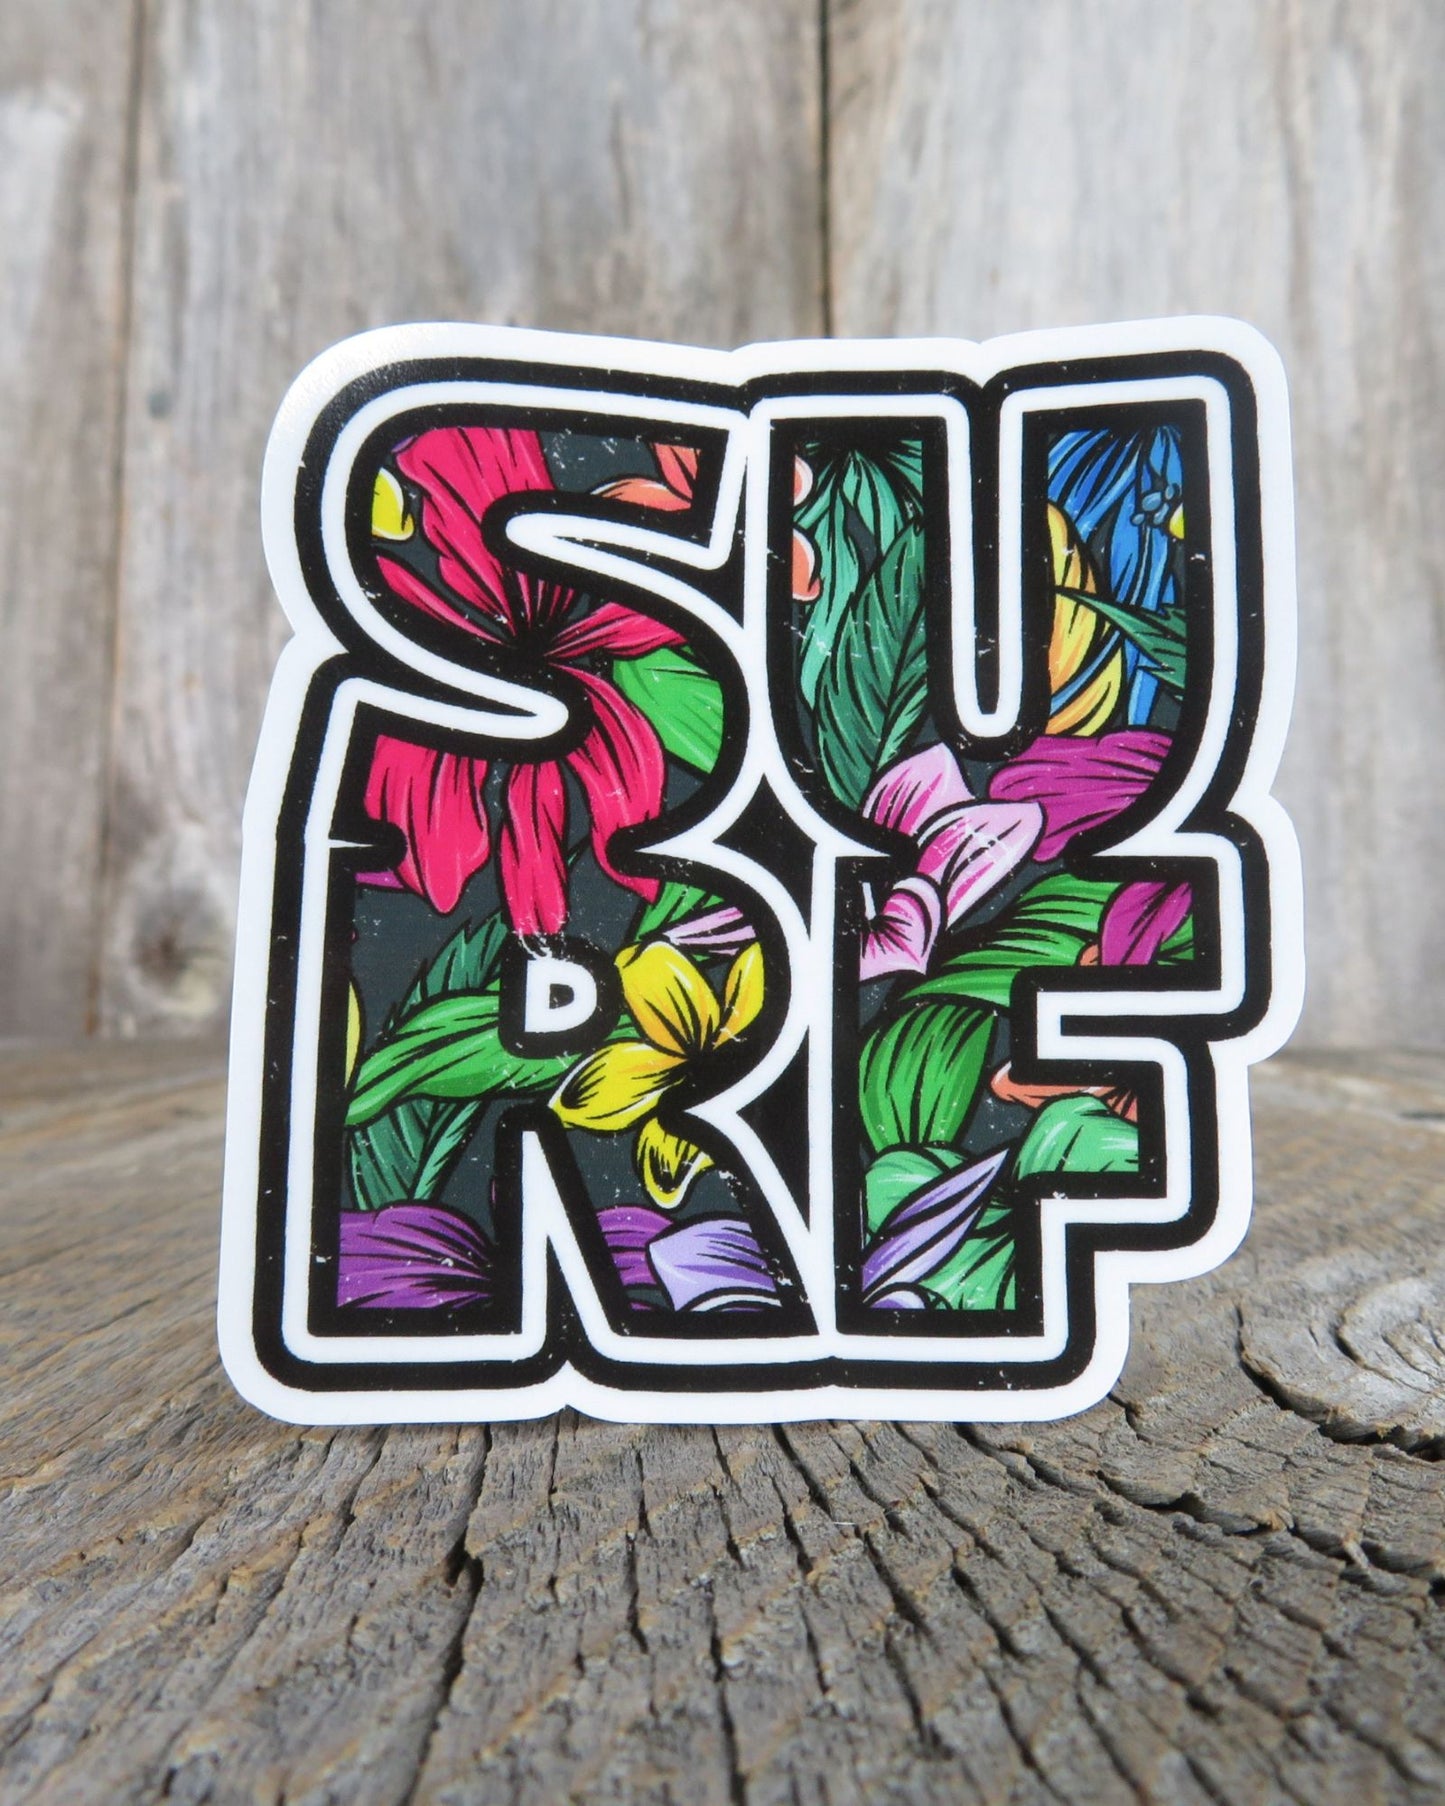 Surf Sticker Floral Stacked Letters Surfers Waterproof Tropical Print Surfing Lover